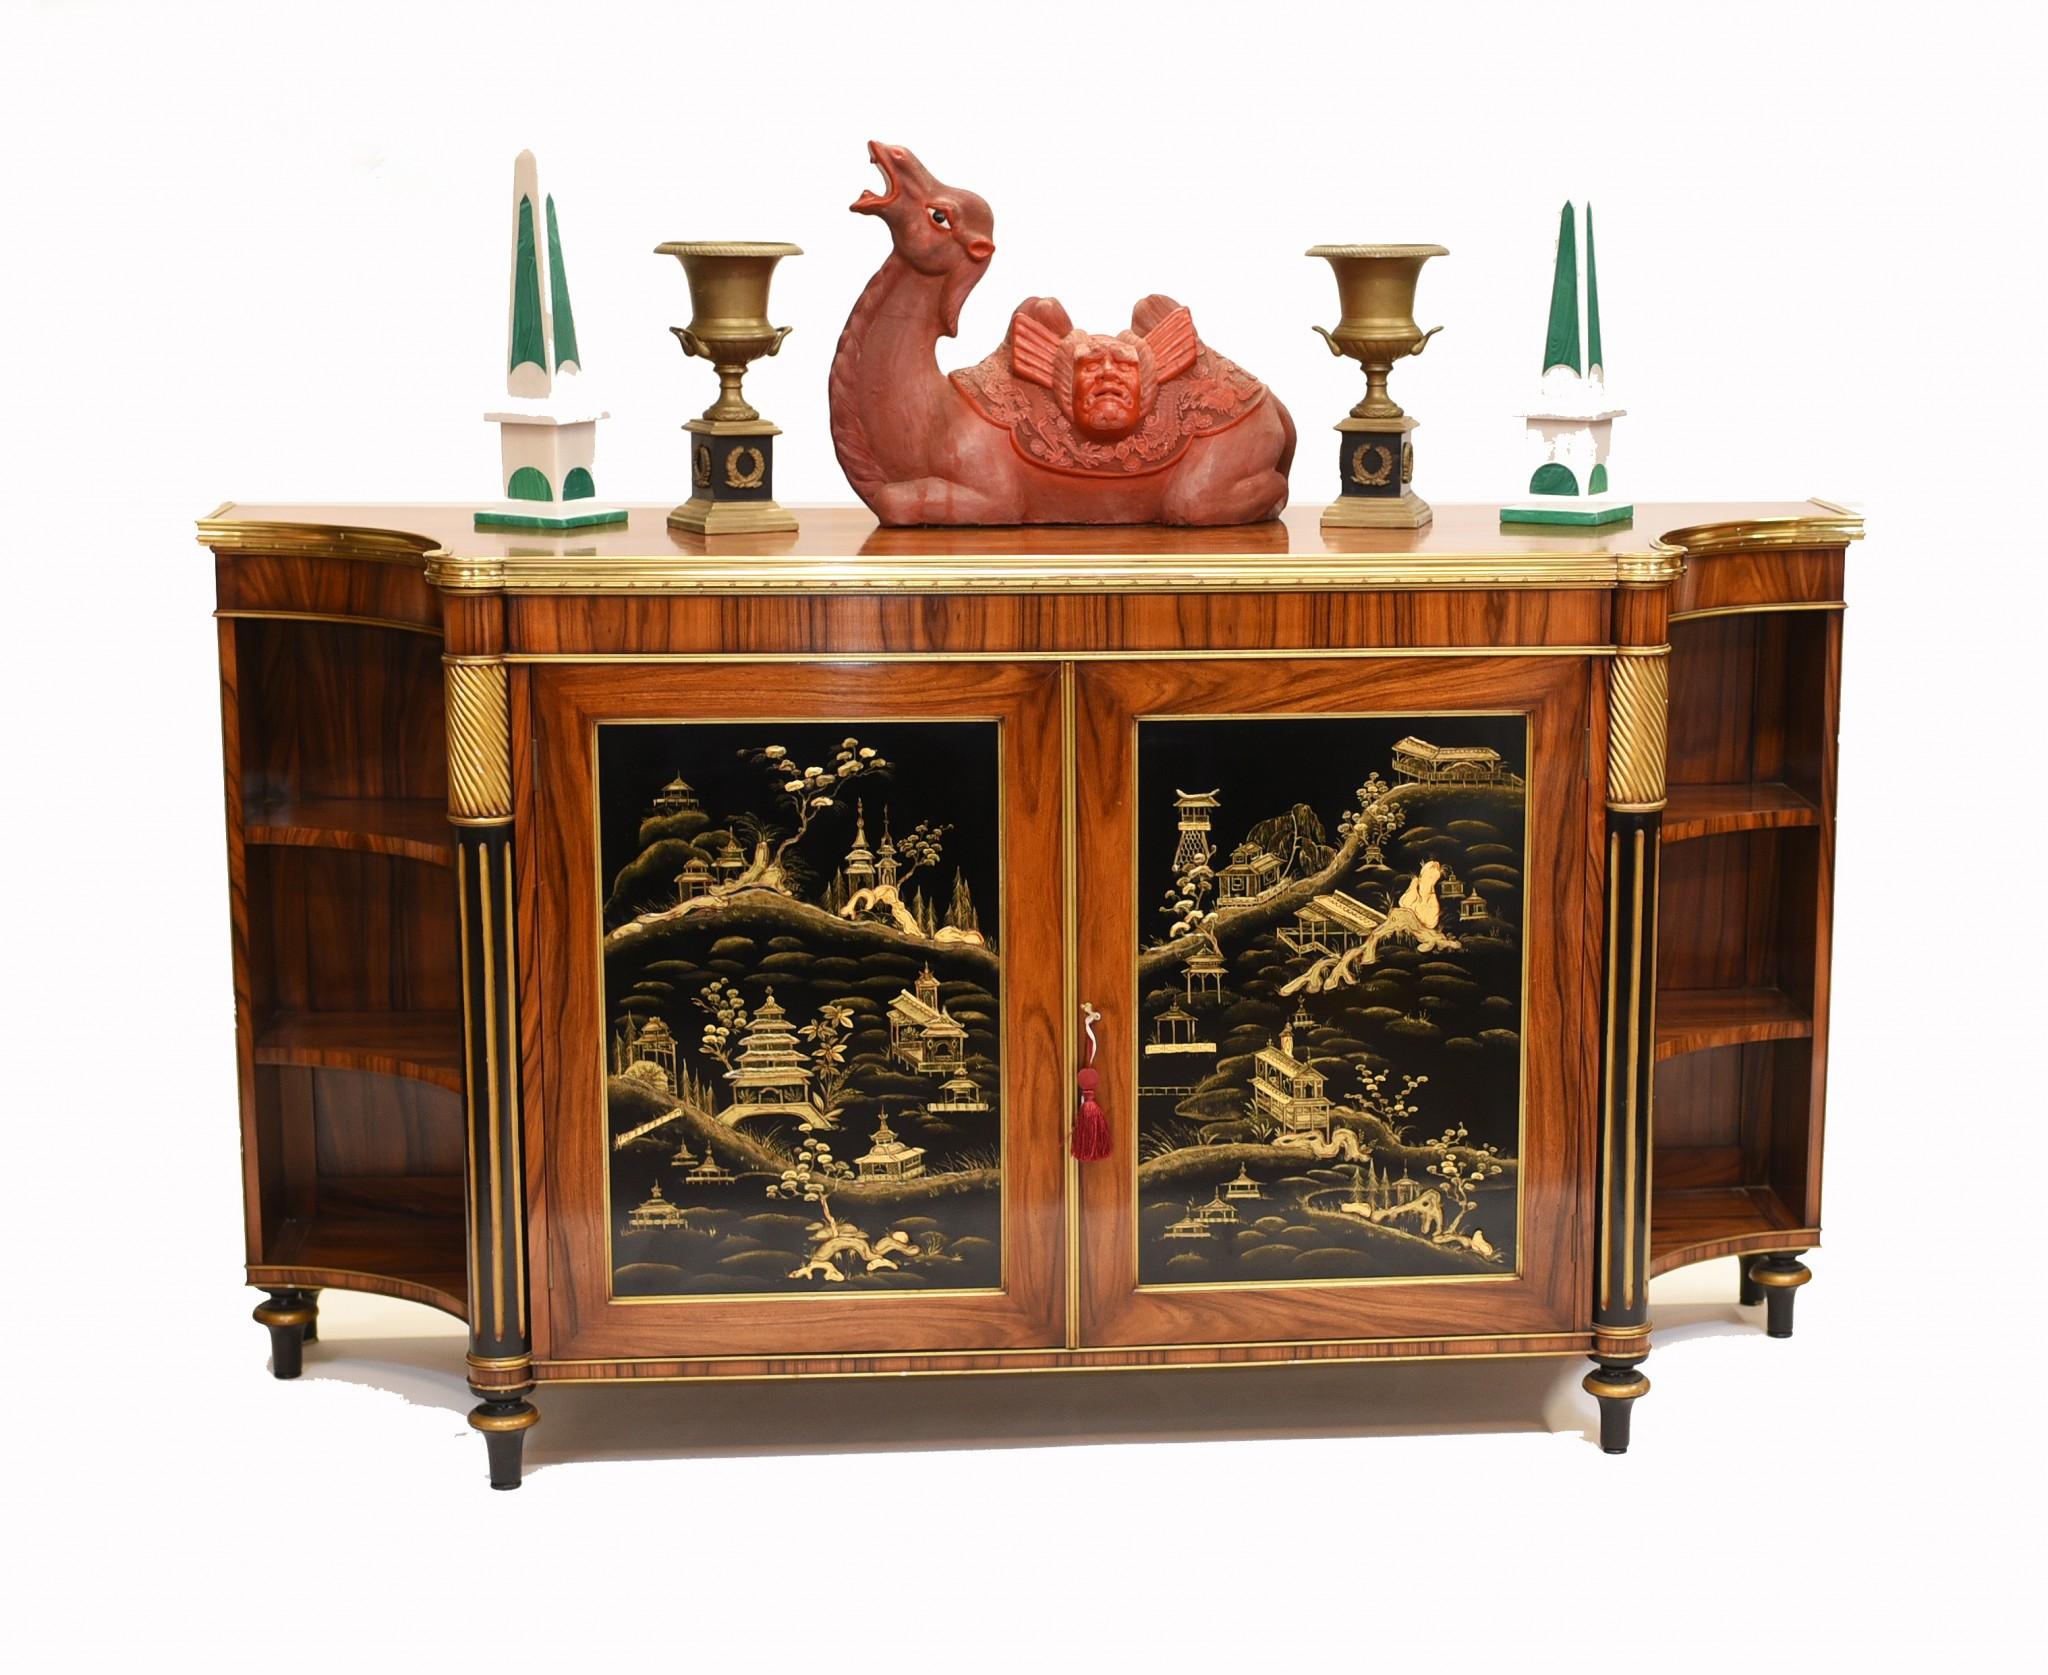 - You are viewing a gorgeous French antique Regency chiffonier - or sideboard
- The piece has been crafted from rosewood with original ormolu fixtures
- Of course the main feature is perhaps the door panels decorated with ornate Chinoiserie
- This